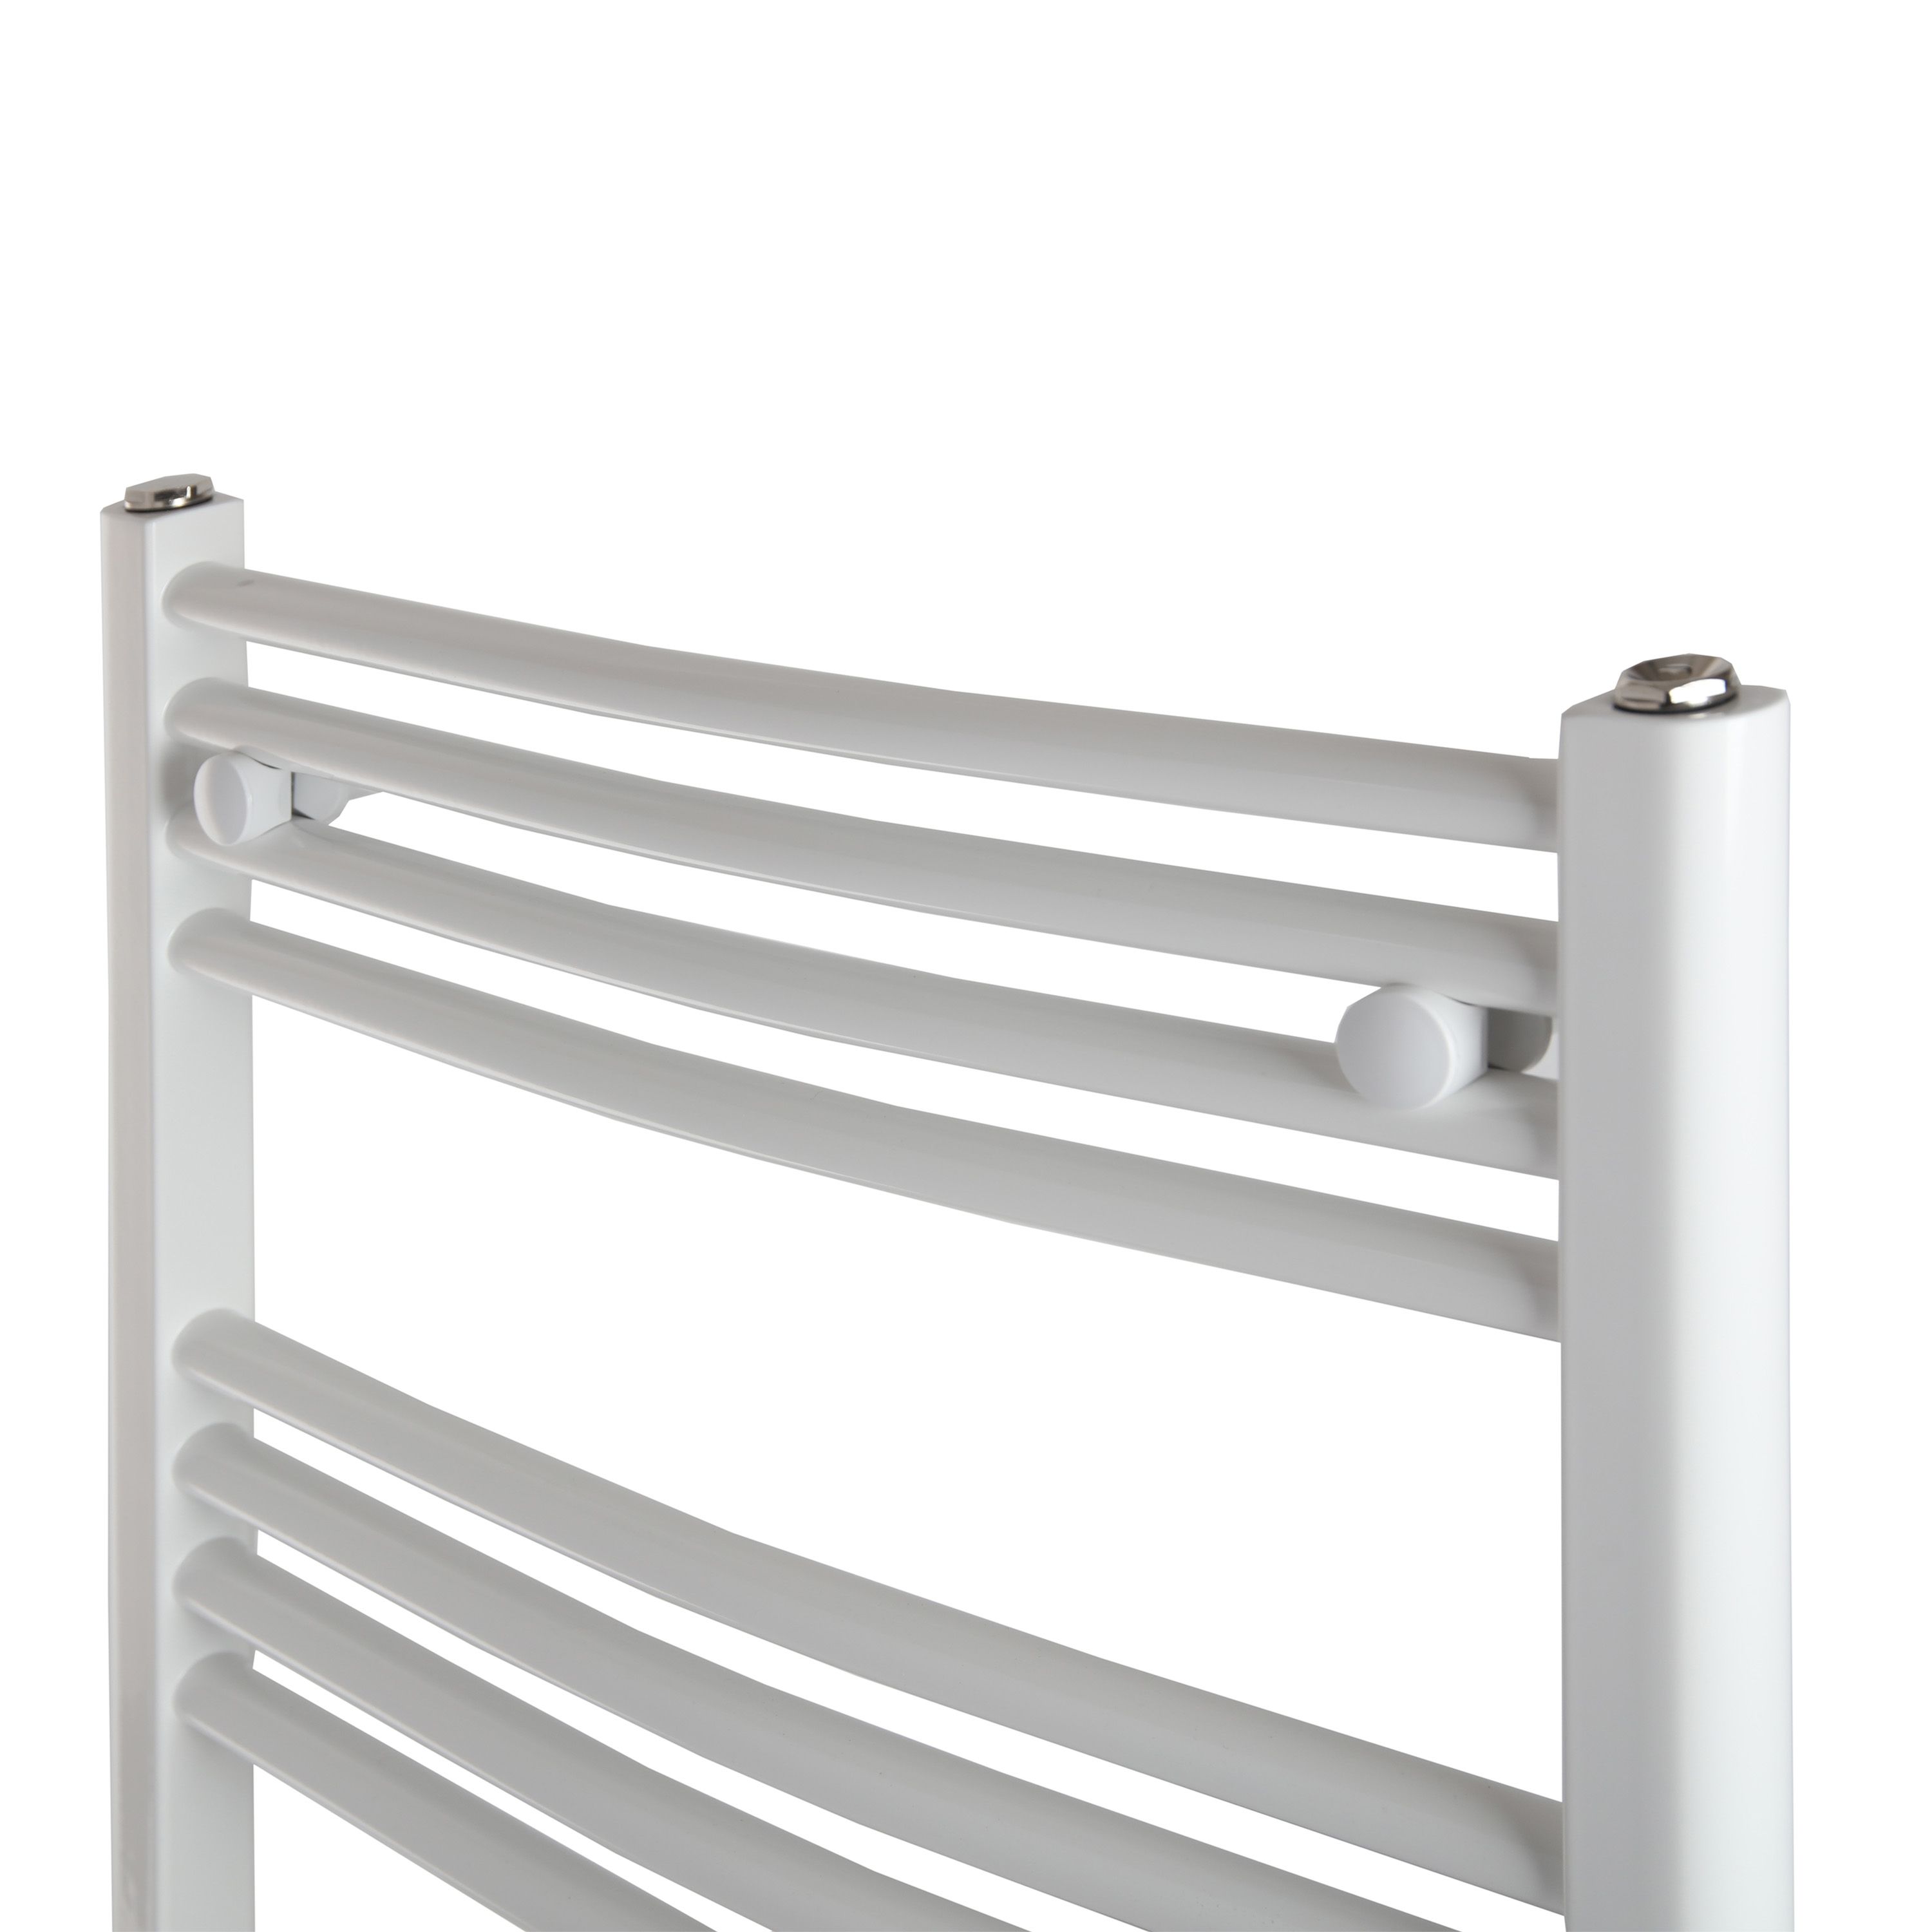 Flomasta, White Vertical Curved Towel radiator (W)600mm x (H)1100mm